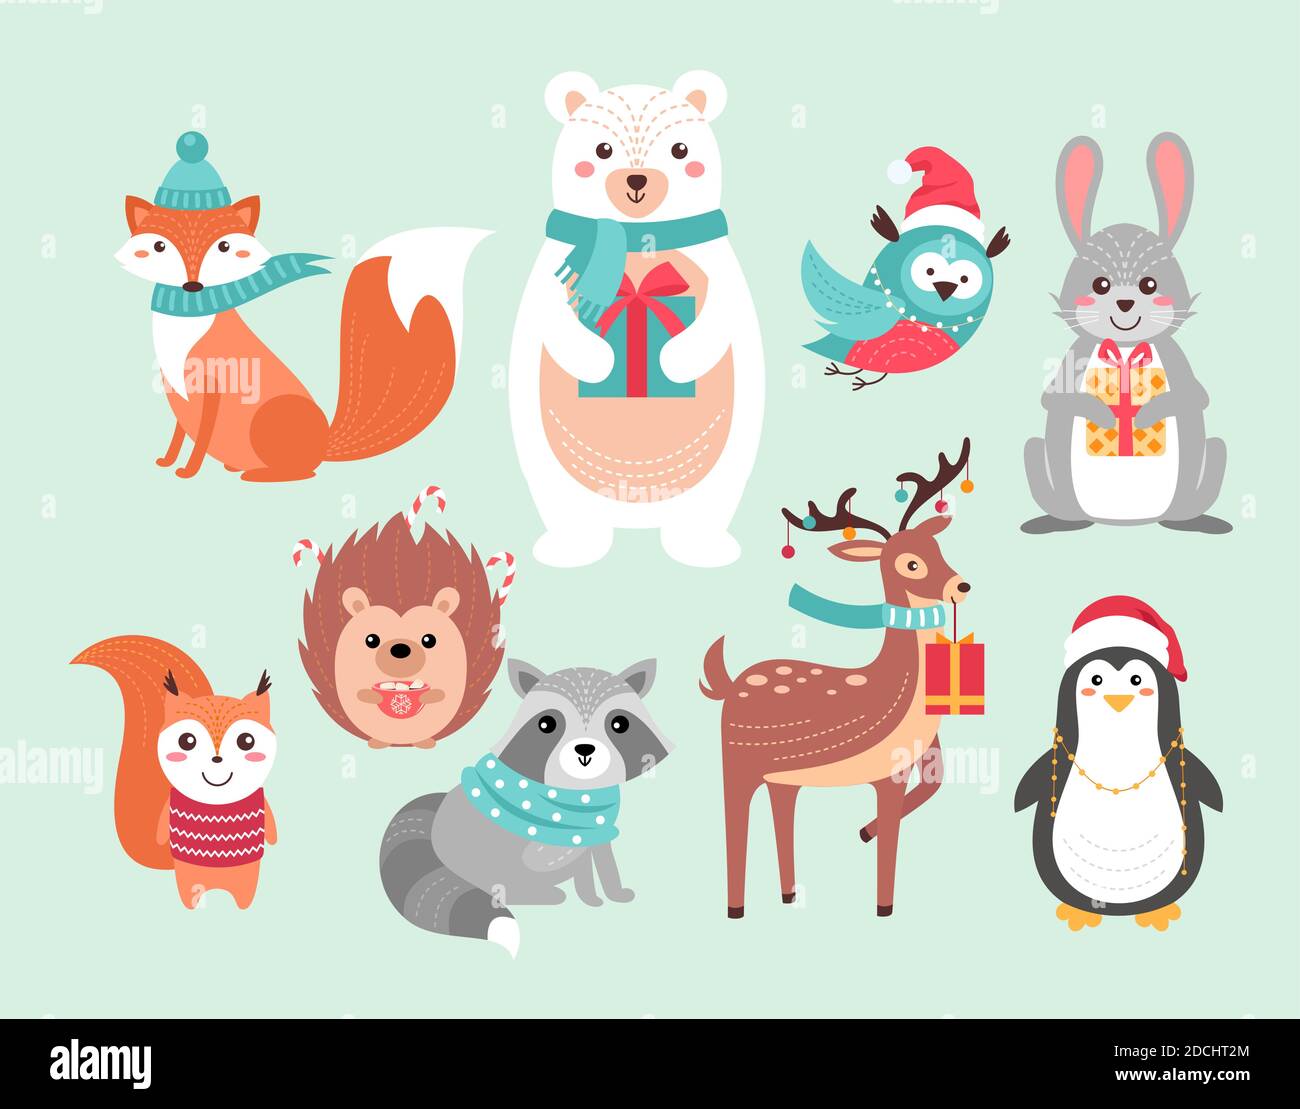 Christmas cute woodland animals vector illustration set. Funny forest xmas  animal characters holding gifts and hot drink mug, wearing scarf and red  Stock Vector Image & Art - Alamy